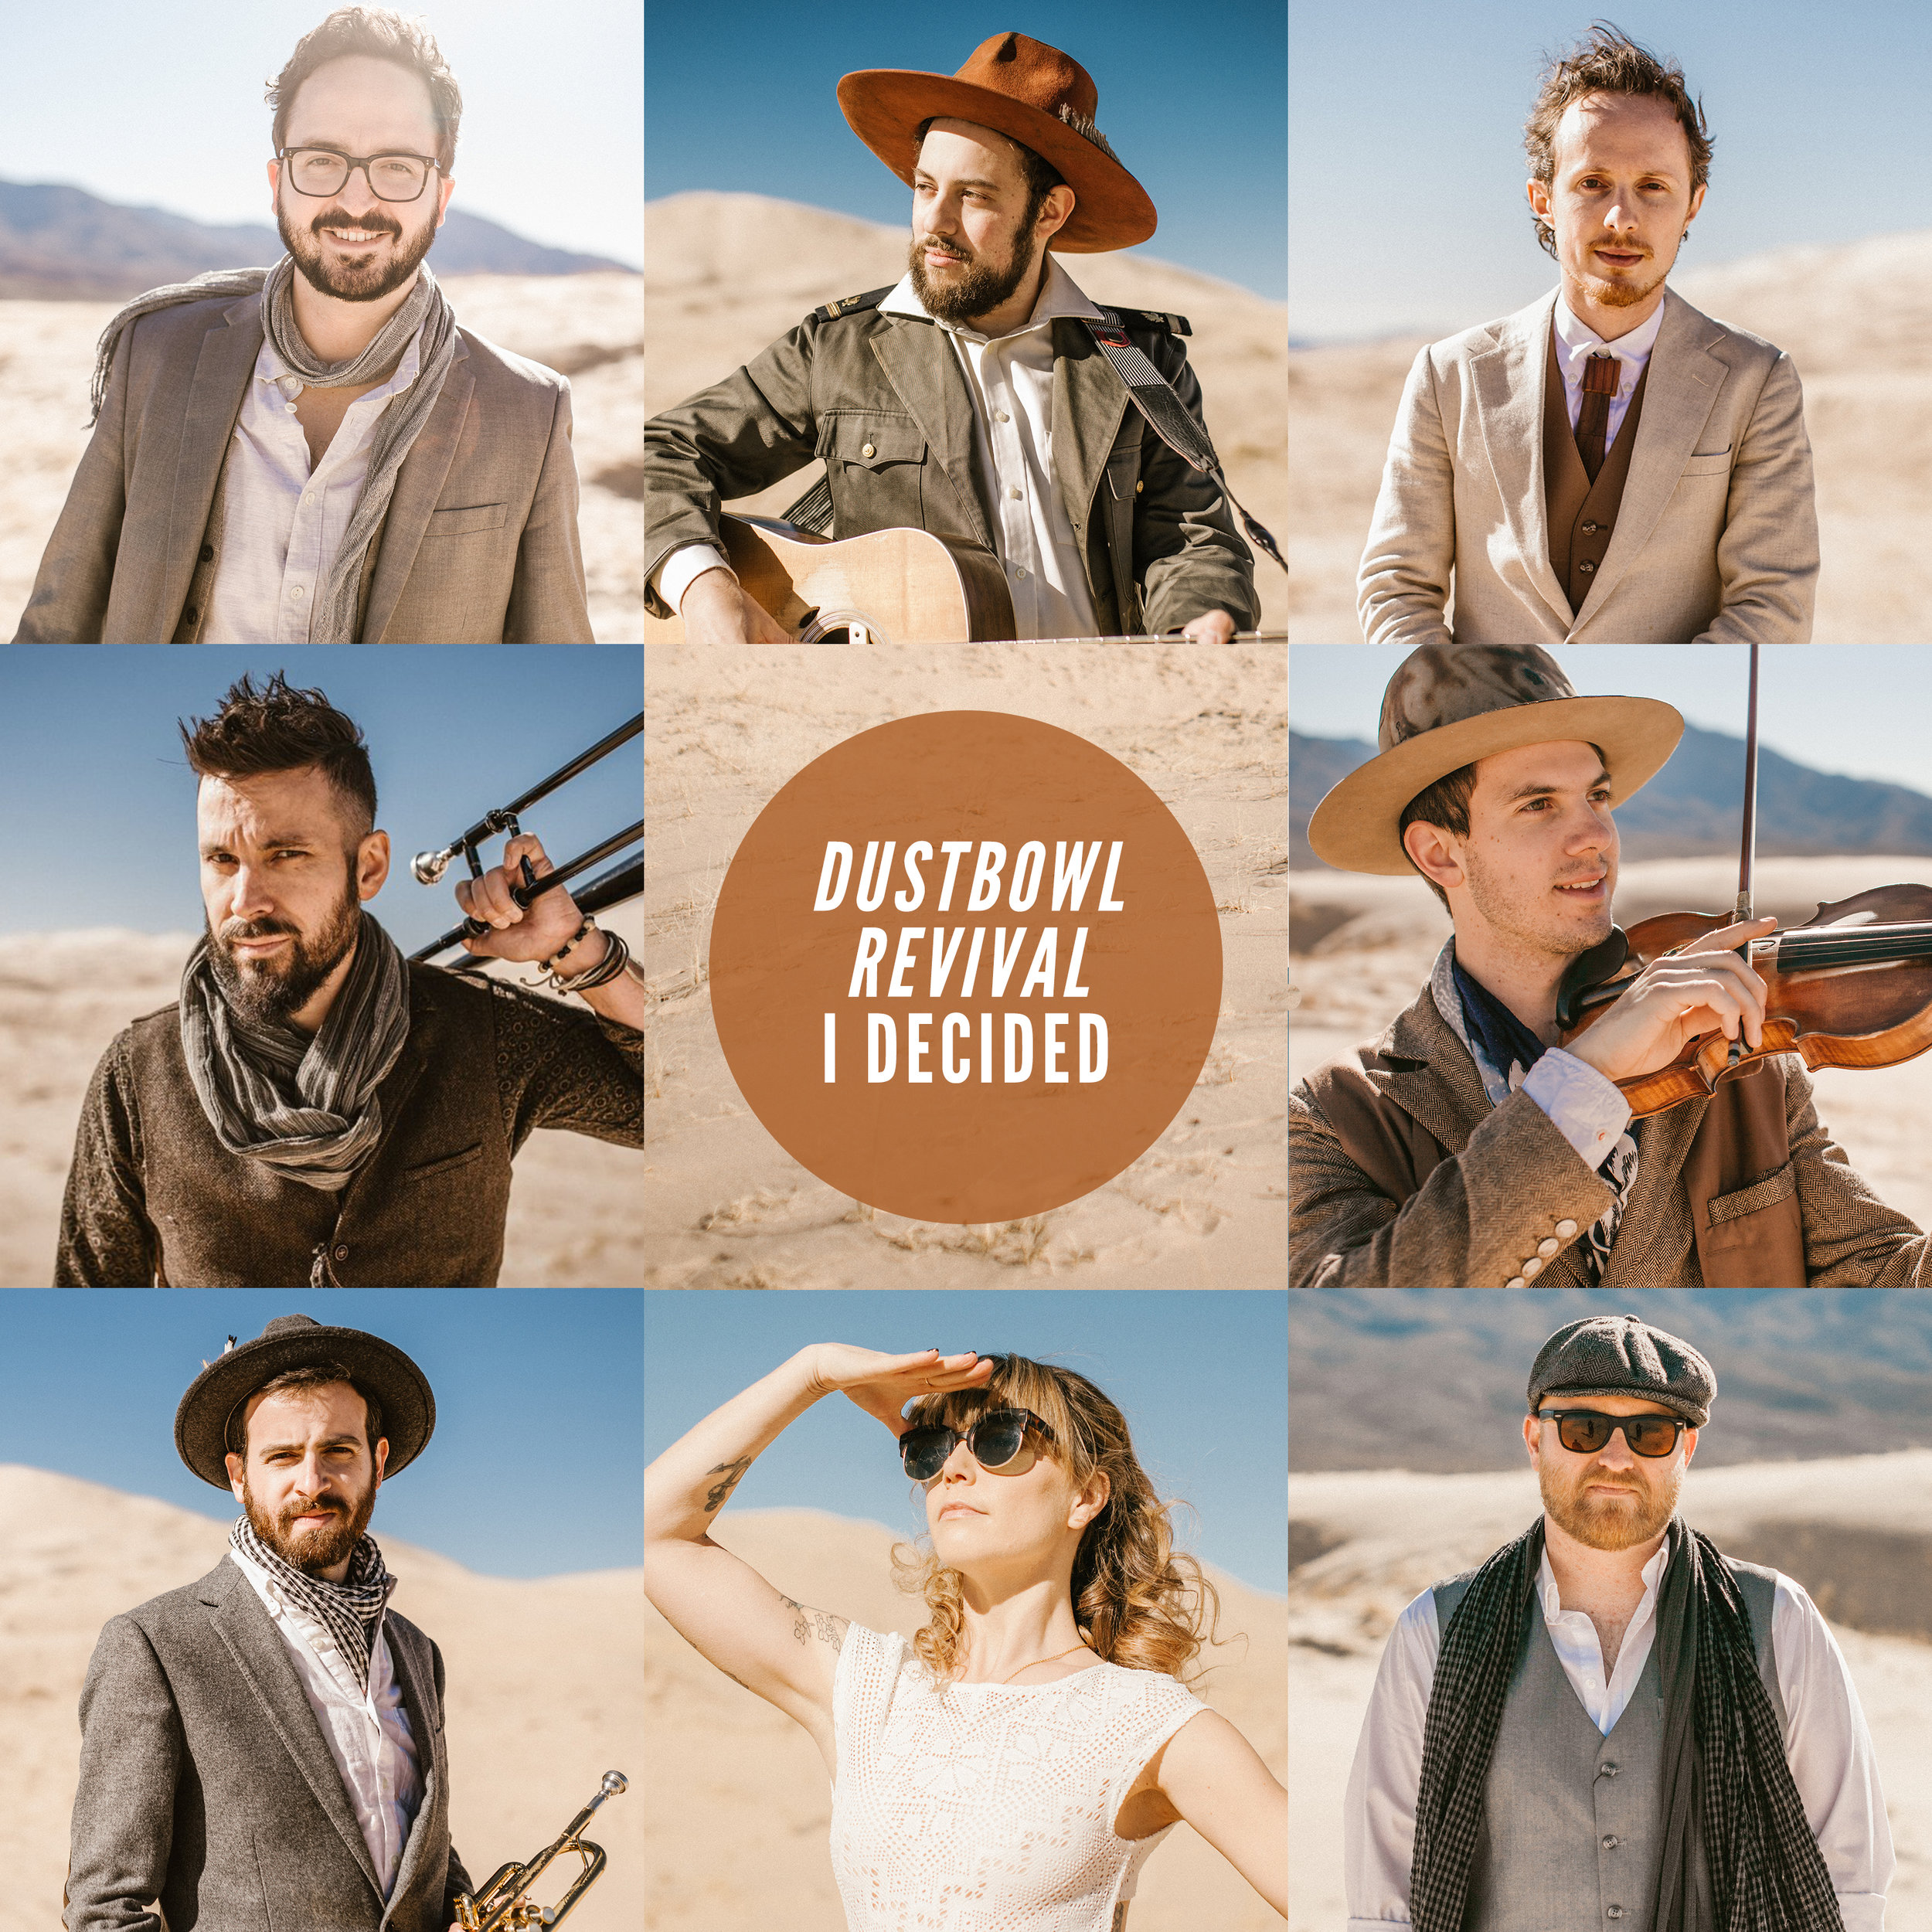 SIG-CD-2097 The Dustbowl Revival - I Decided.jpg